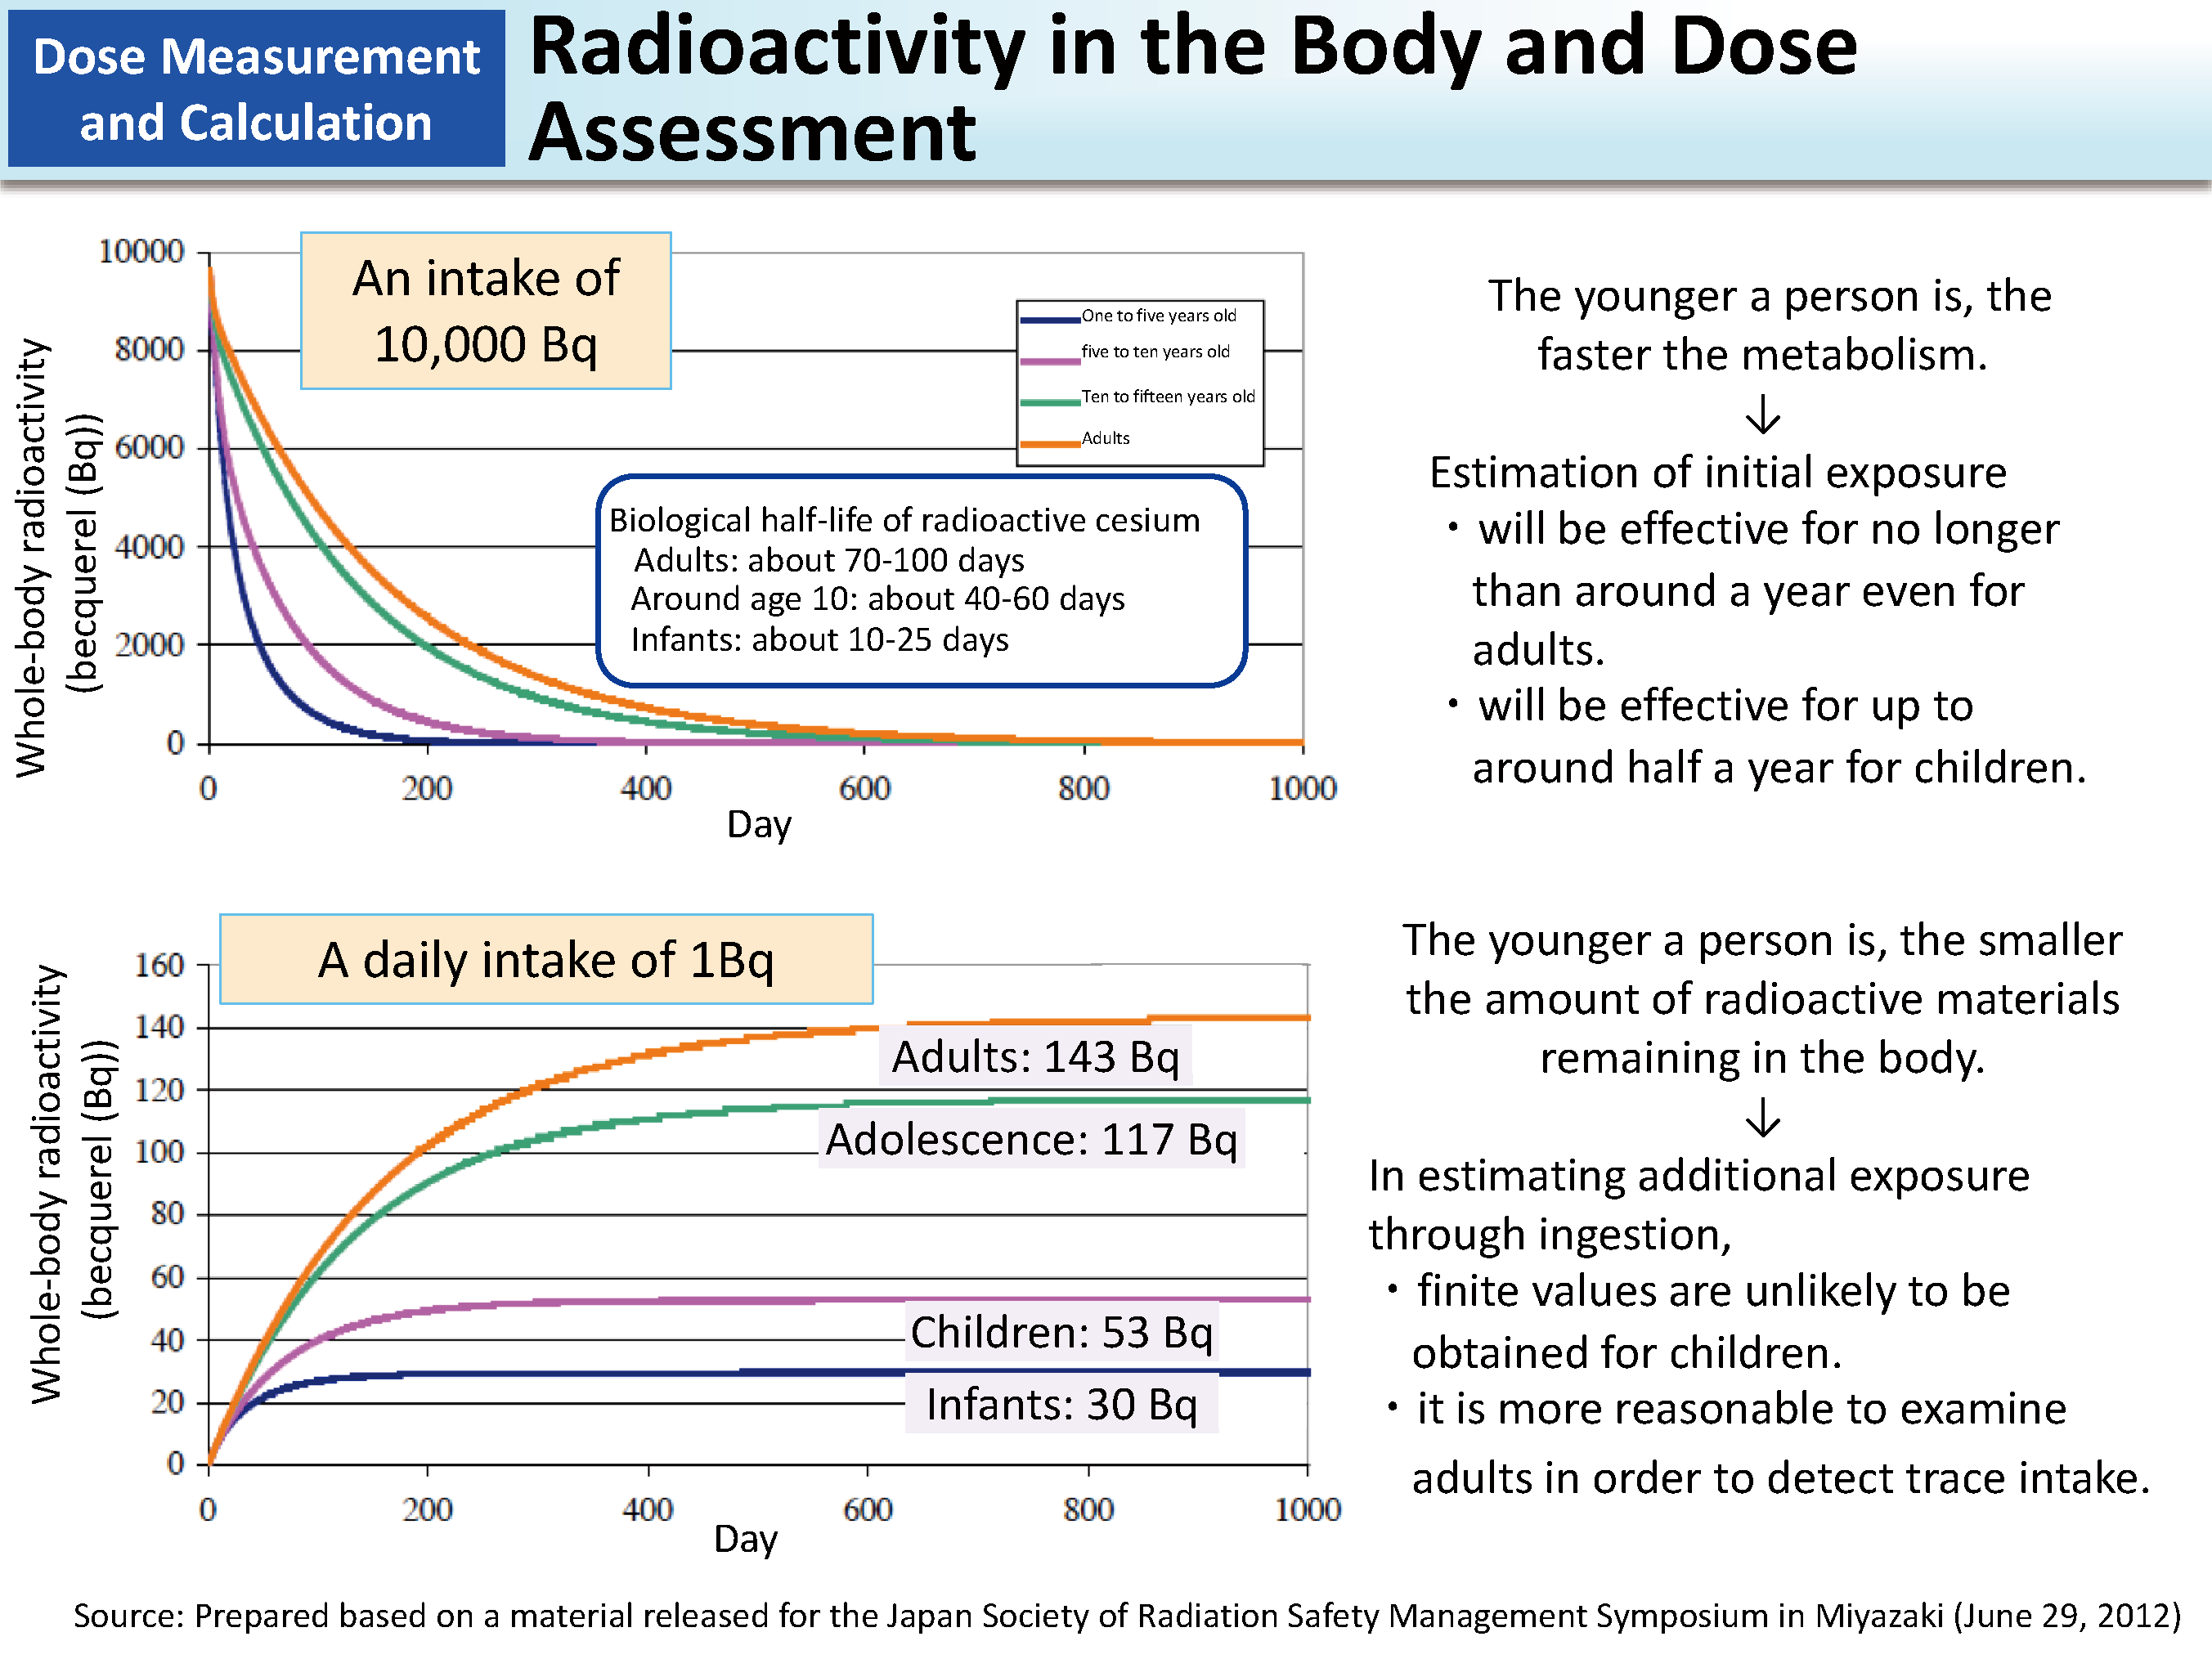 Radioactivity in the Body and Dose Assessment_Figure